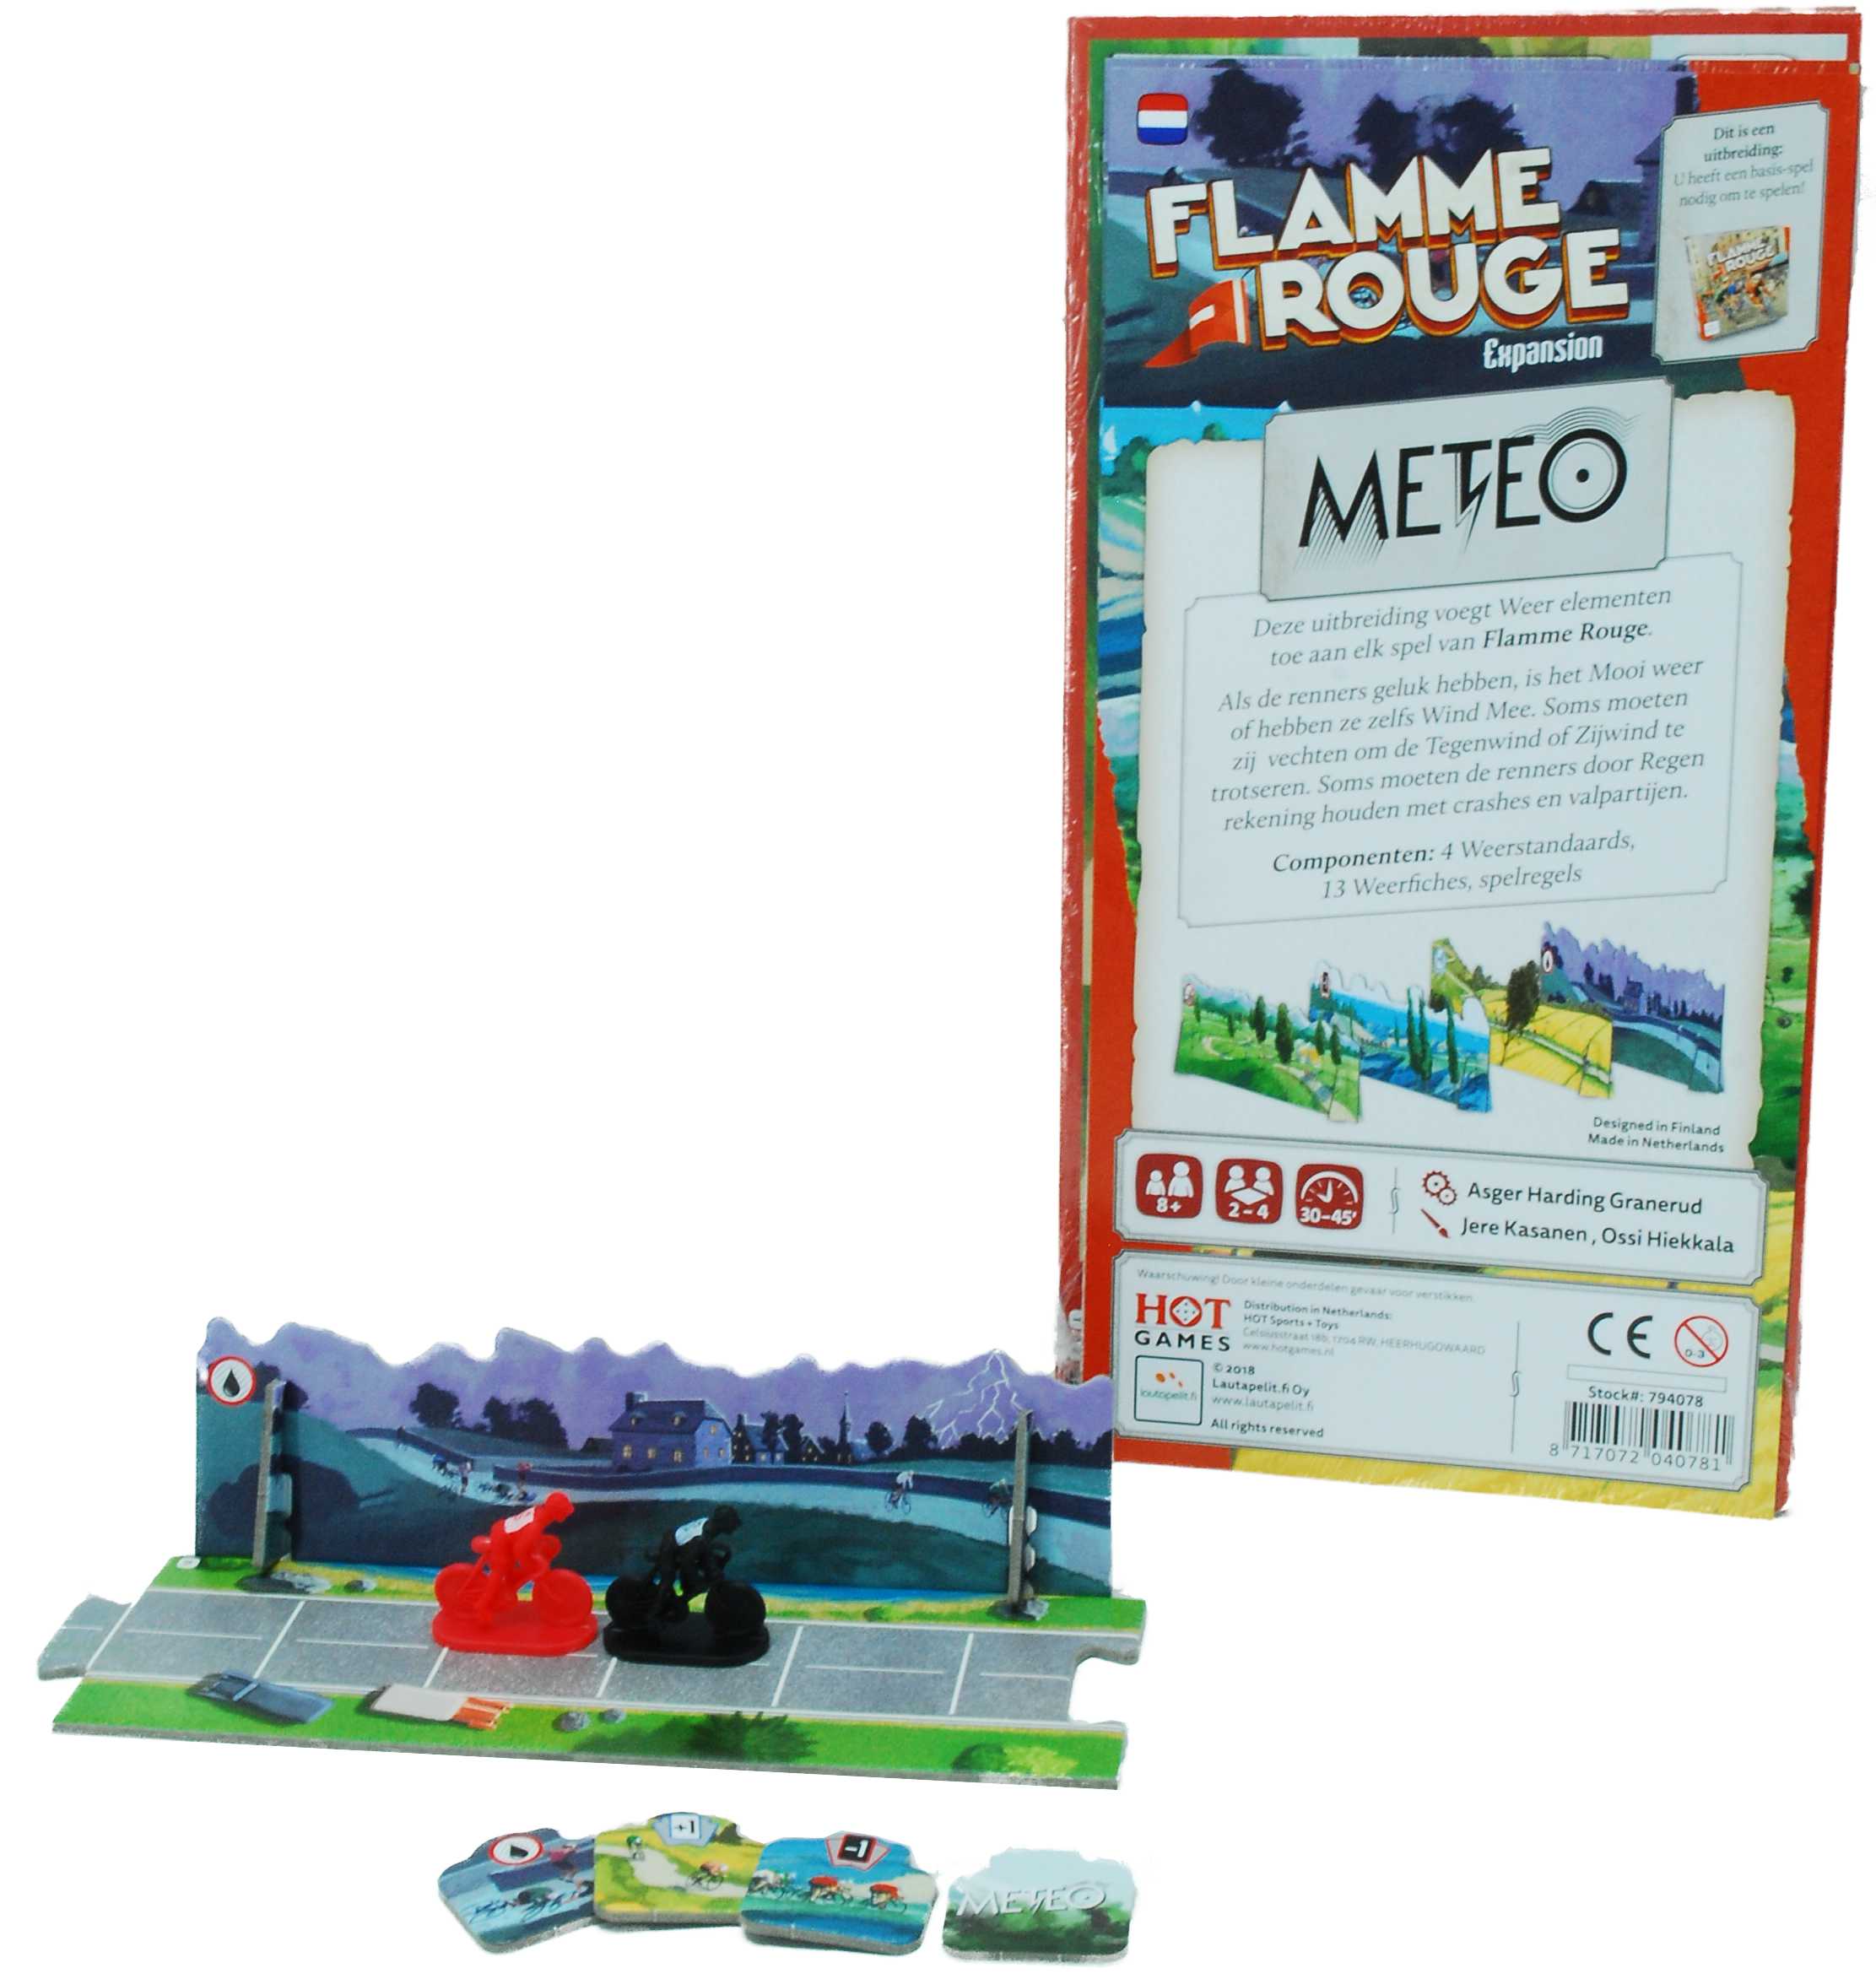 Flamme Rouge Meteo expansion